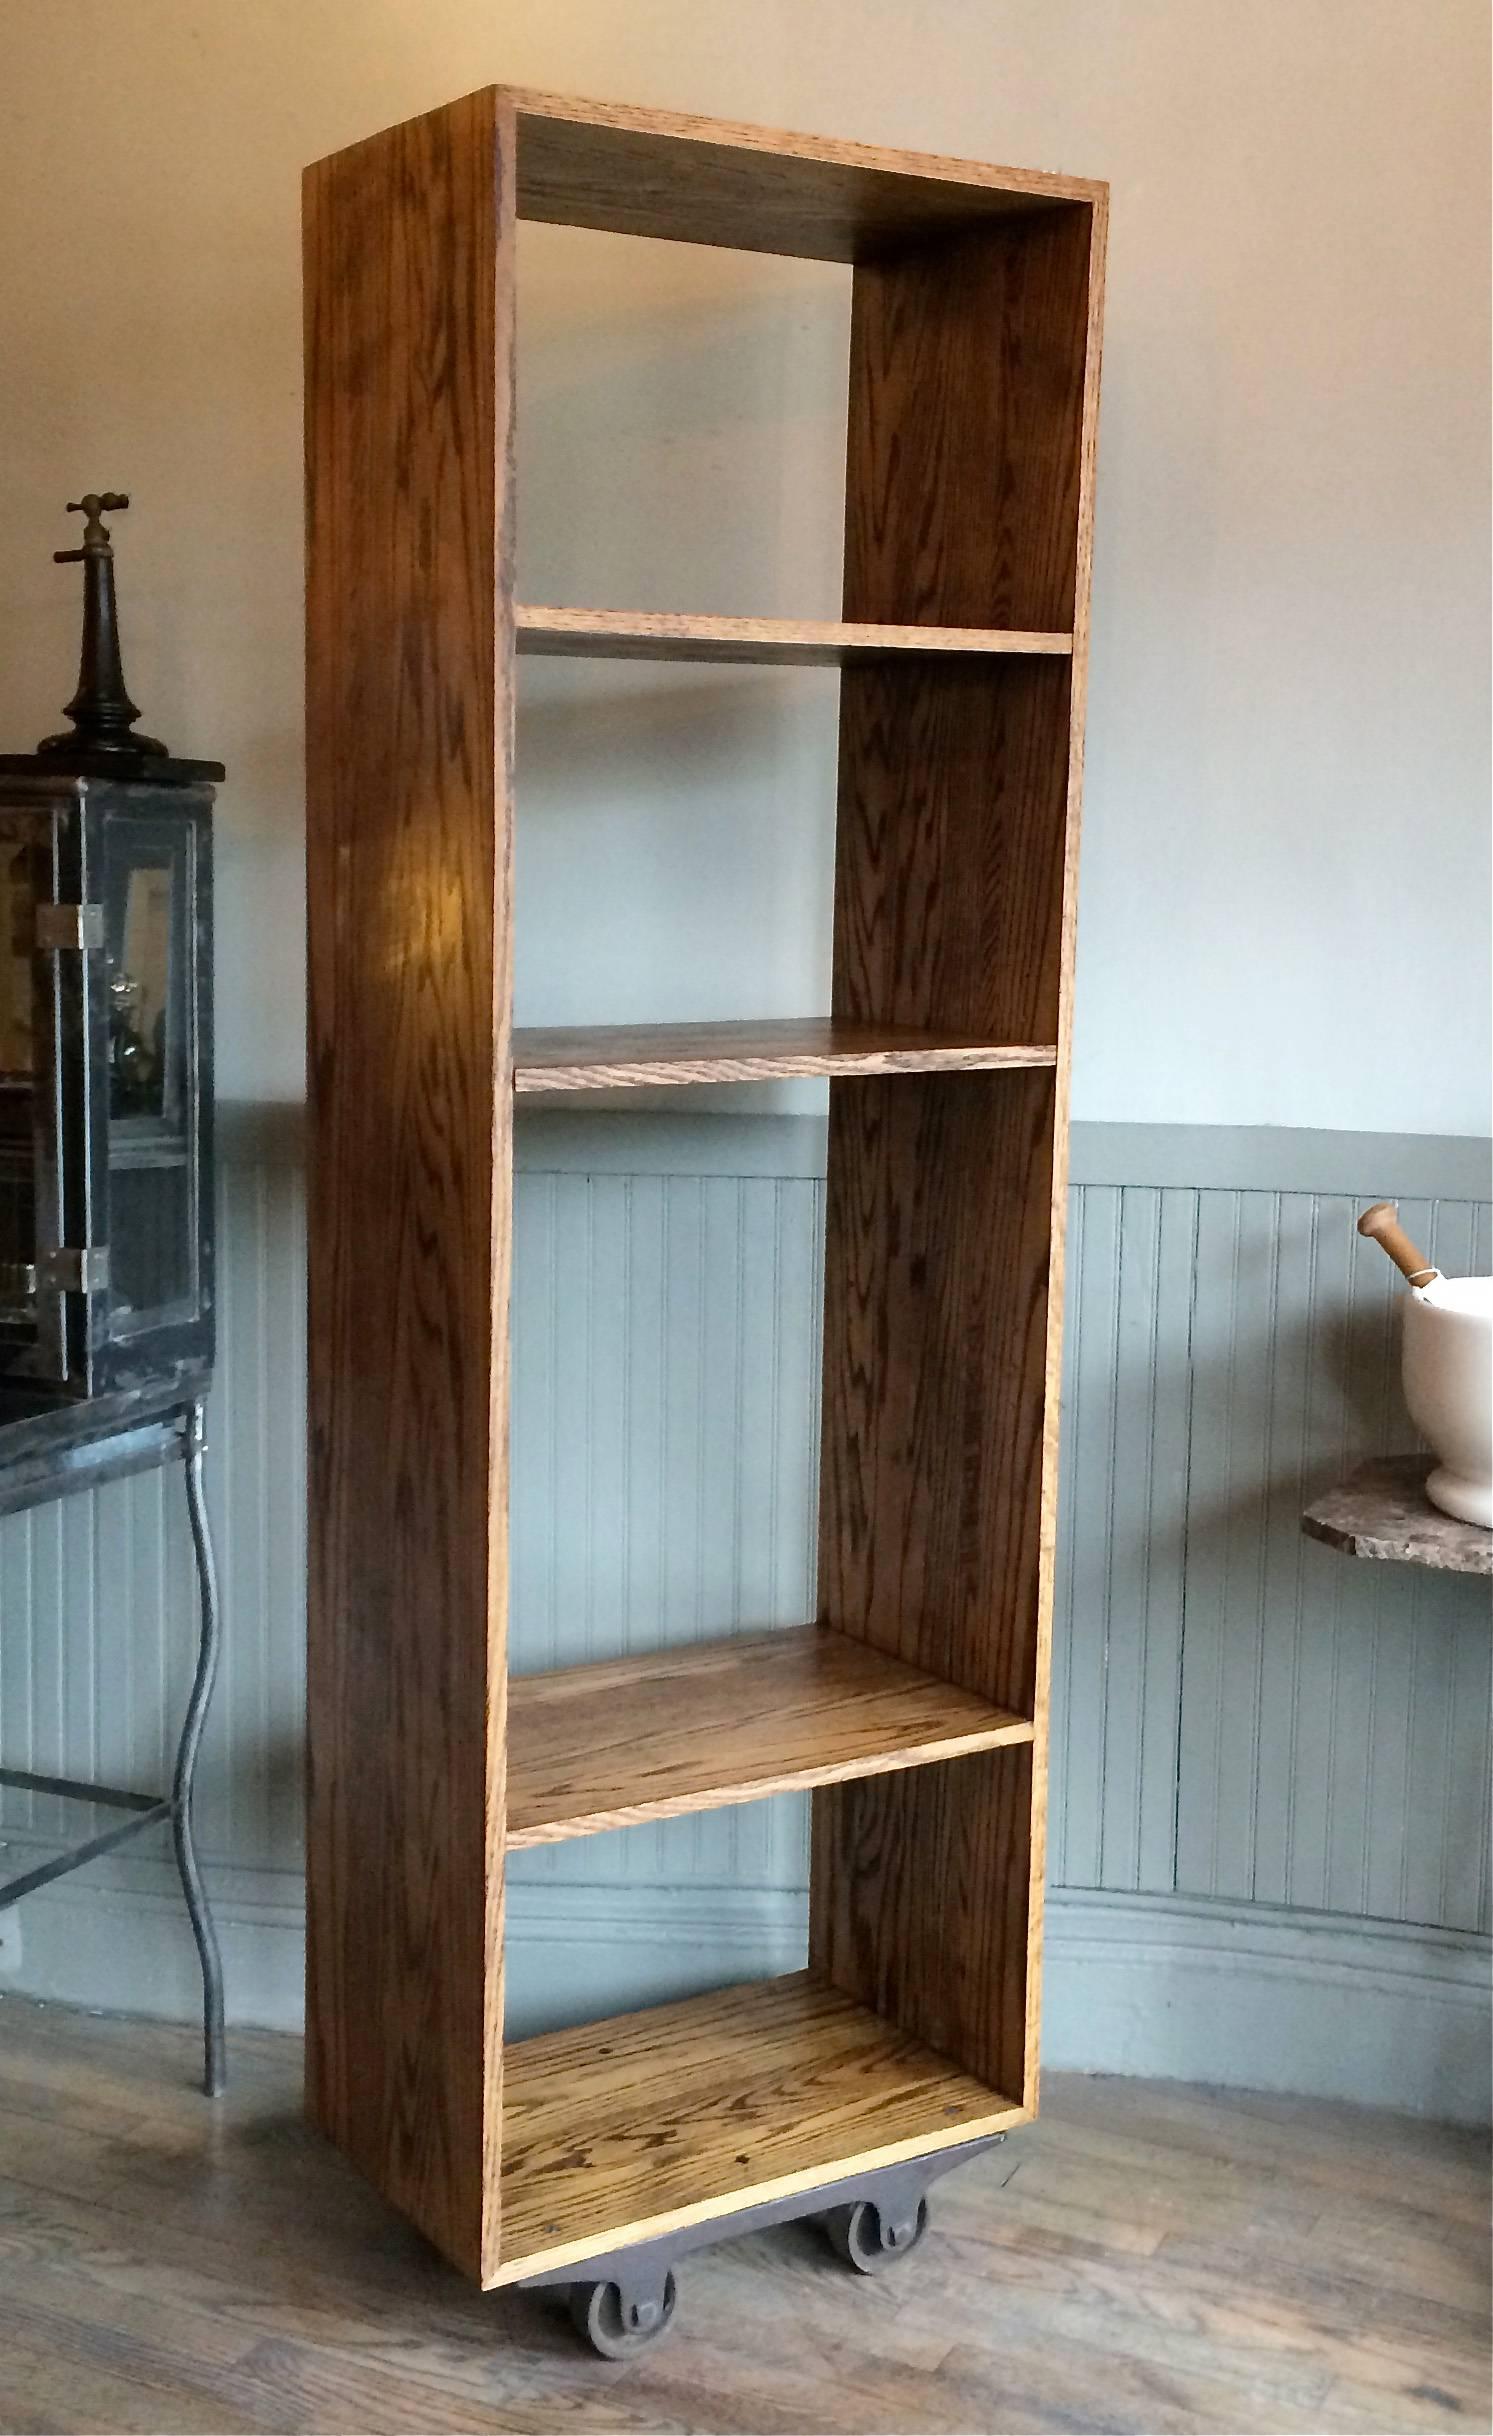 CF signature, solid ash, tall, open, industrial shelving unit, bookcase or display case features two adjustable middle shelves and rolls on antique casters is custom-made in Brooklyn by cityFoundry.